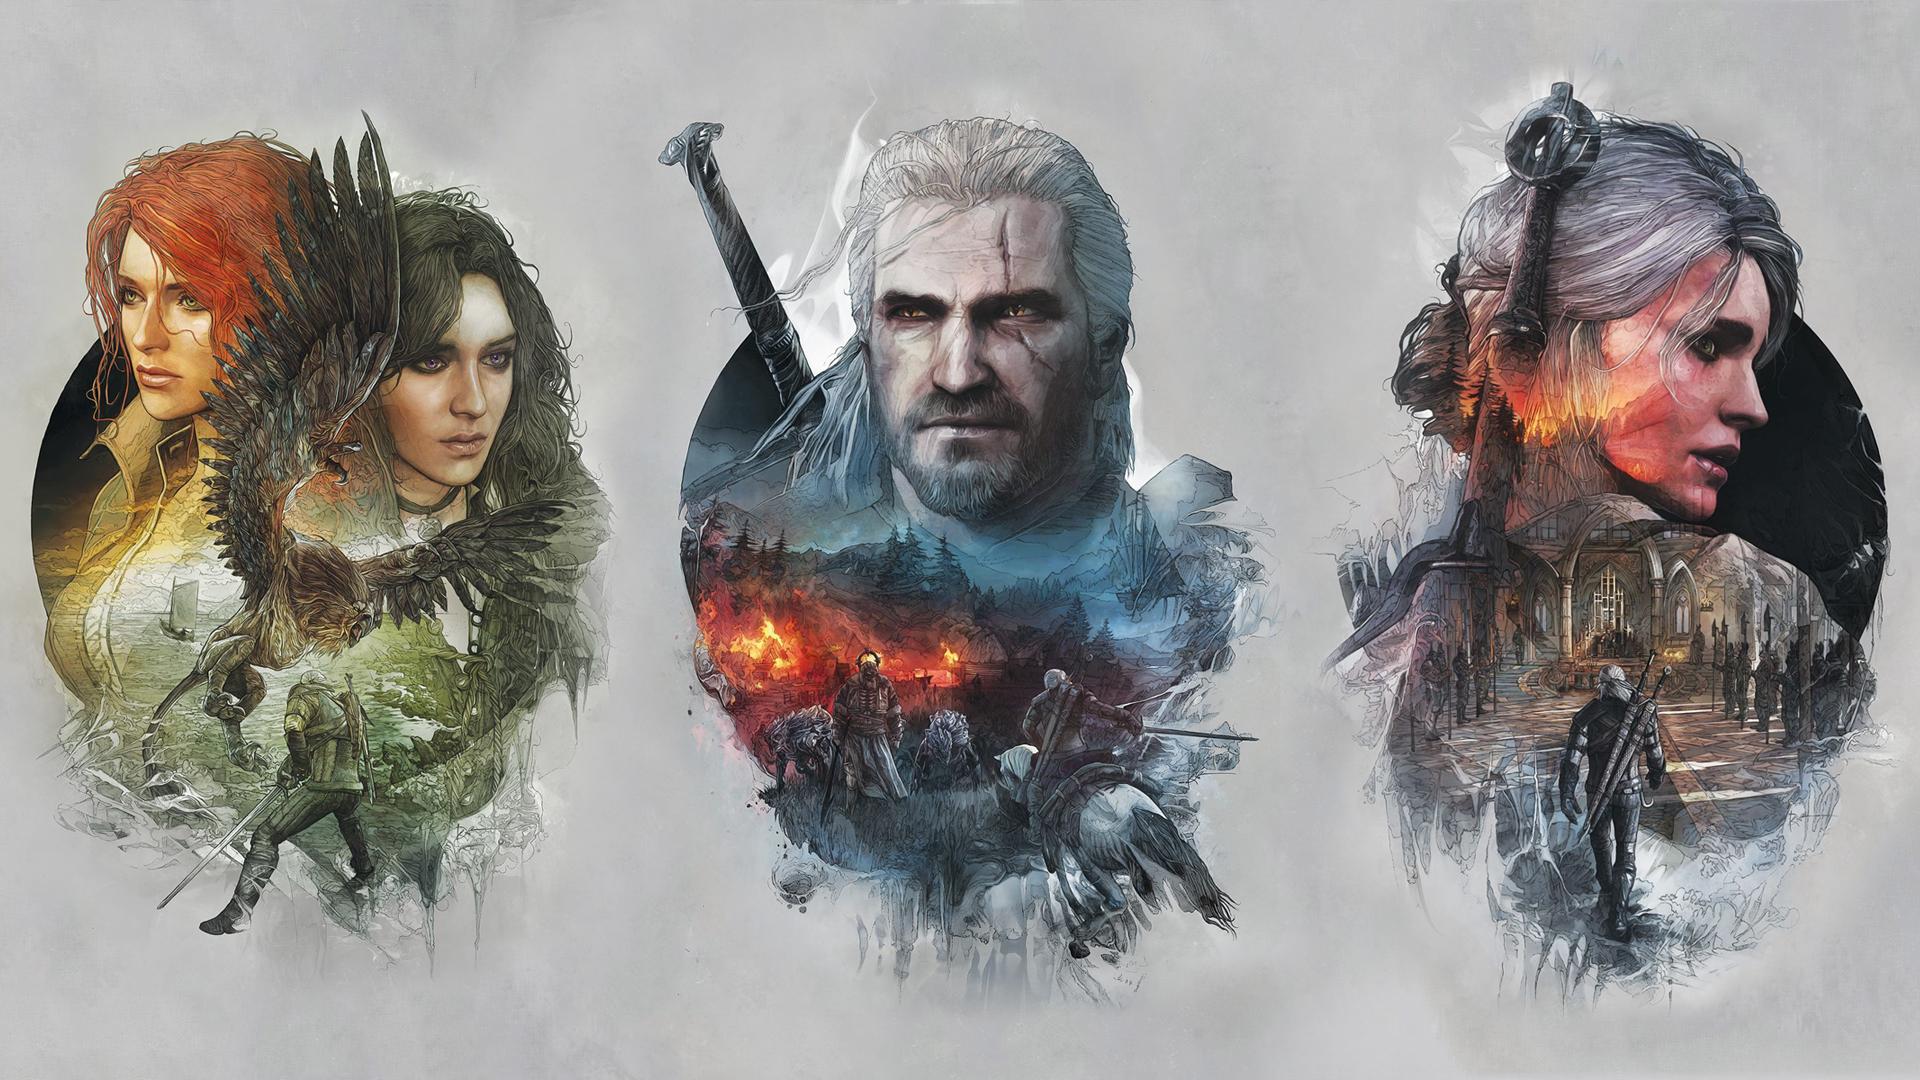 A Witcher 3 Wallpaper I Made By Combining 3 of the Steelbook ...